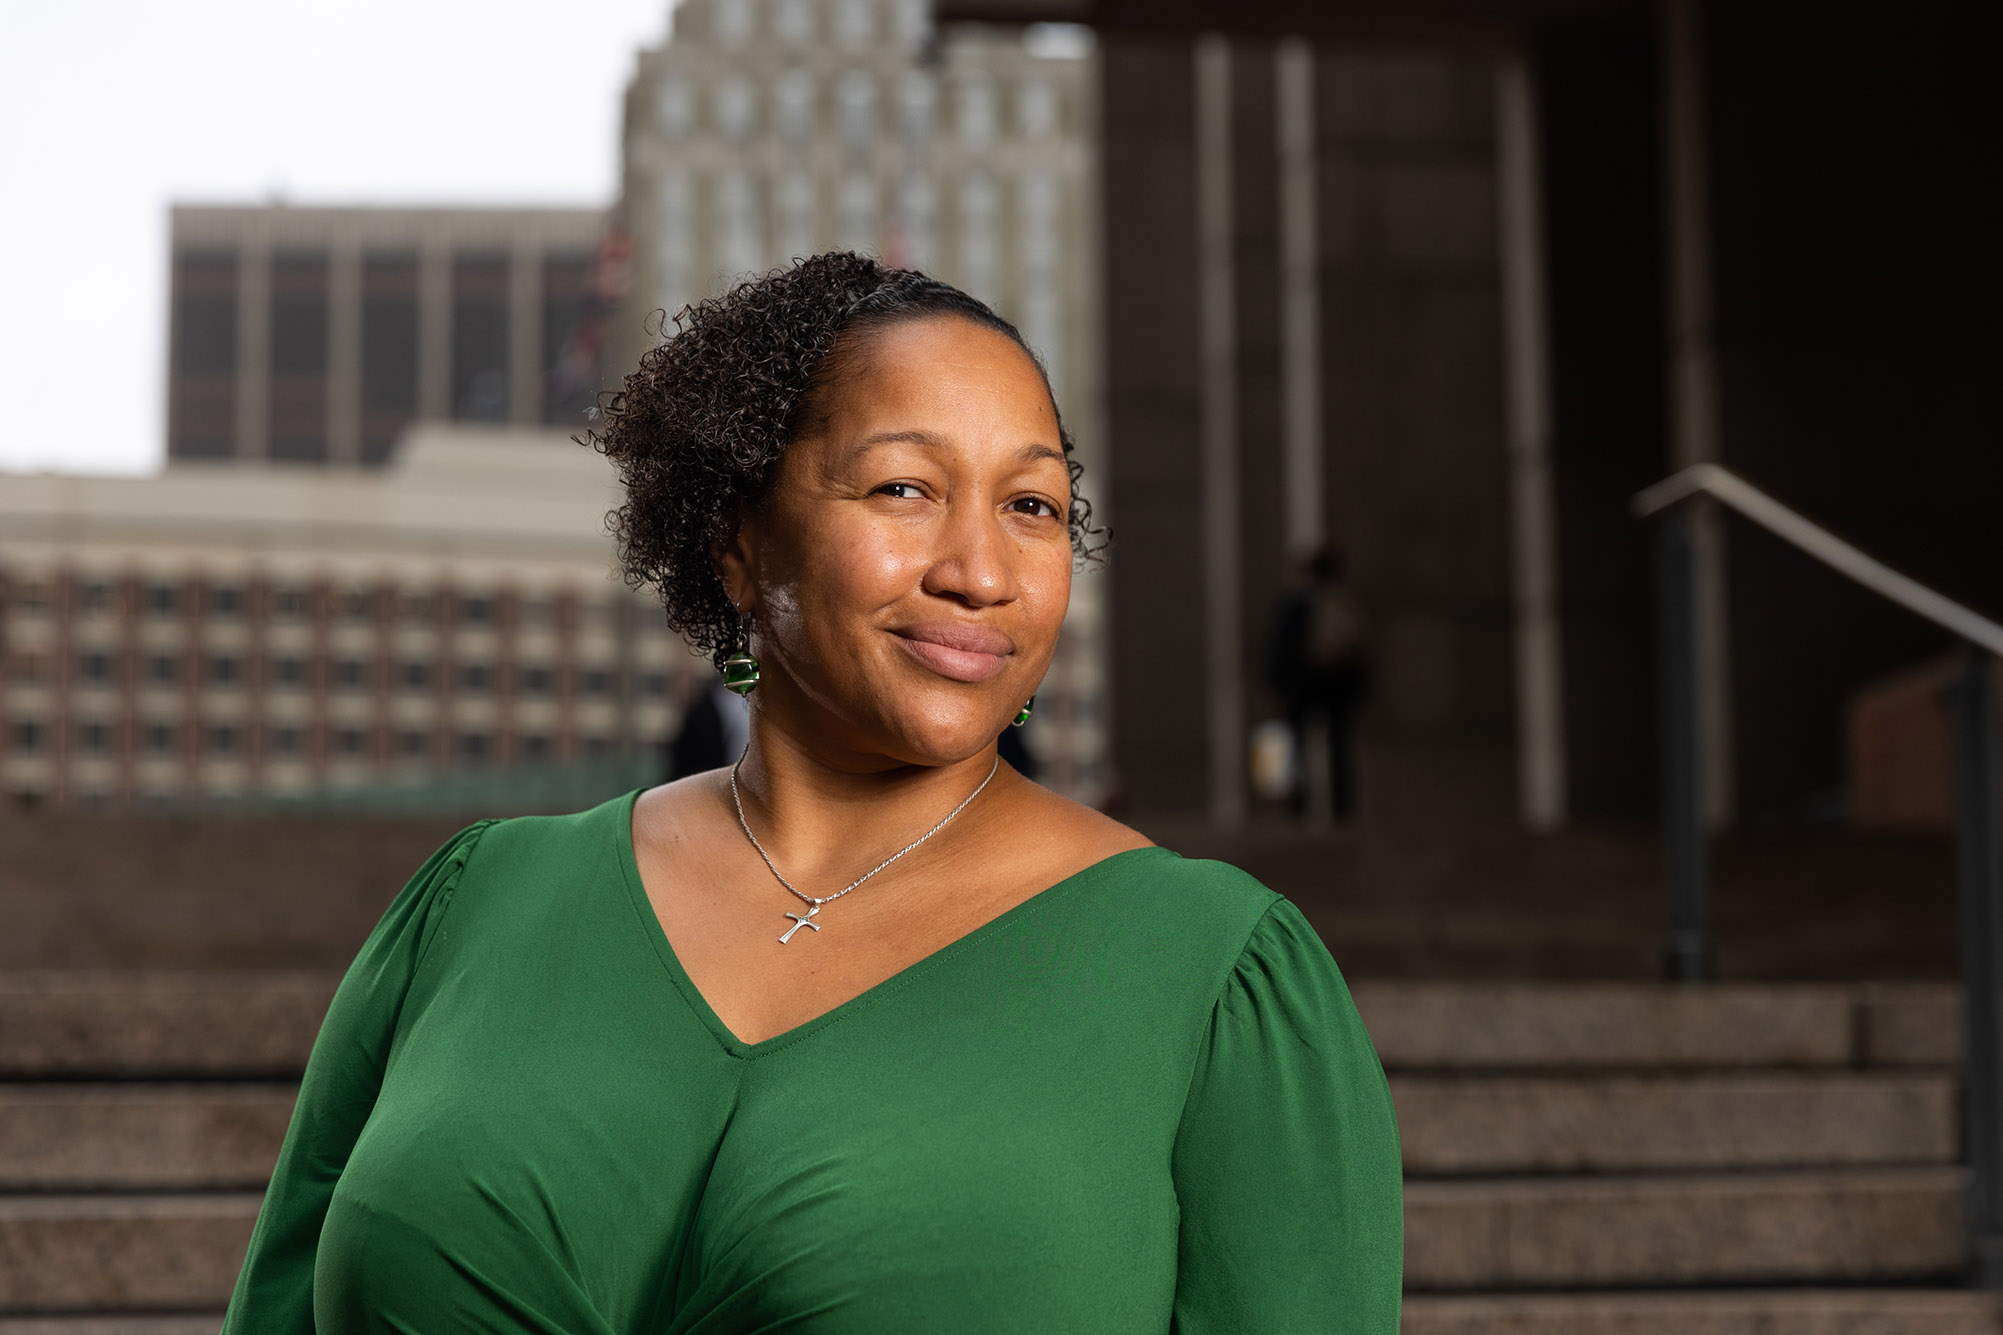 Photo: Reverend Mariama White-Hammond poses for a portrait in front of Boston City Hall. A Black woman with short, curly natural hair smiles and wears a dark green blouse. A city scape and set of cement stairs can be seen in the blurry background.